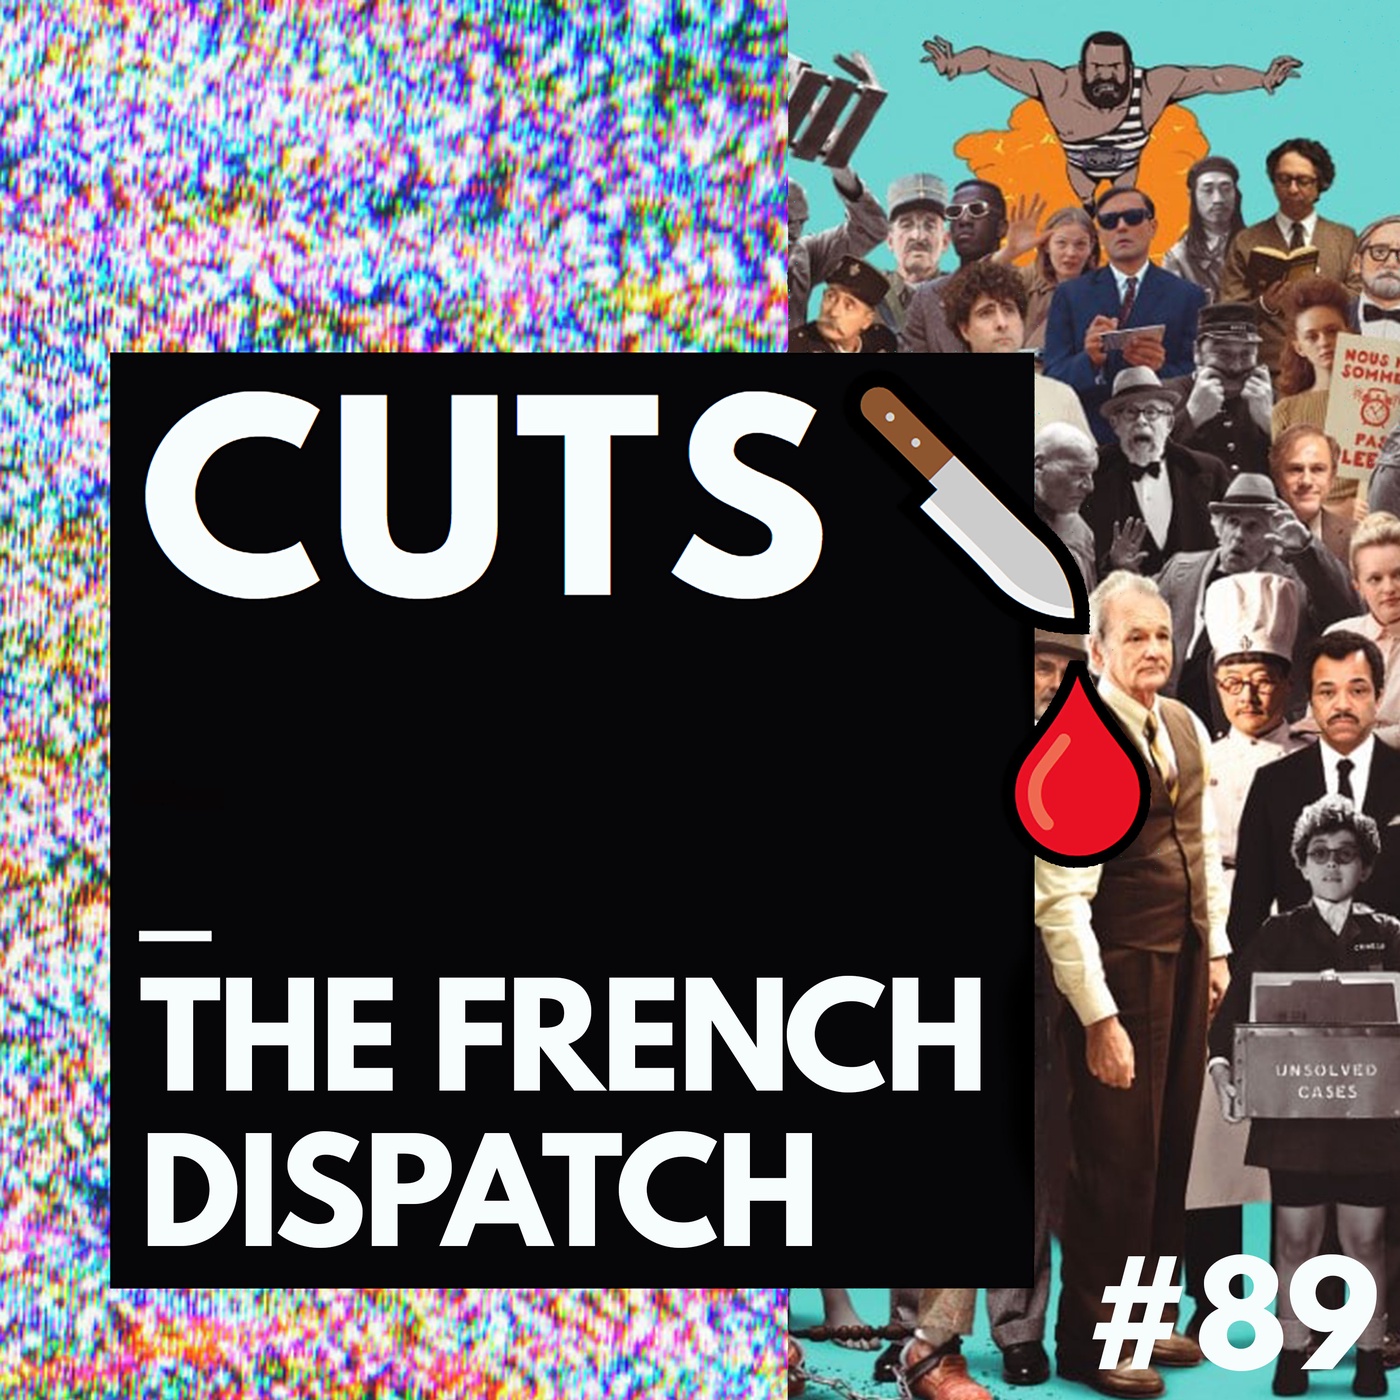 #89 The French Dispatch